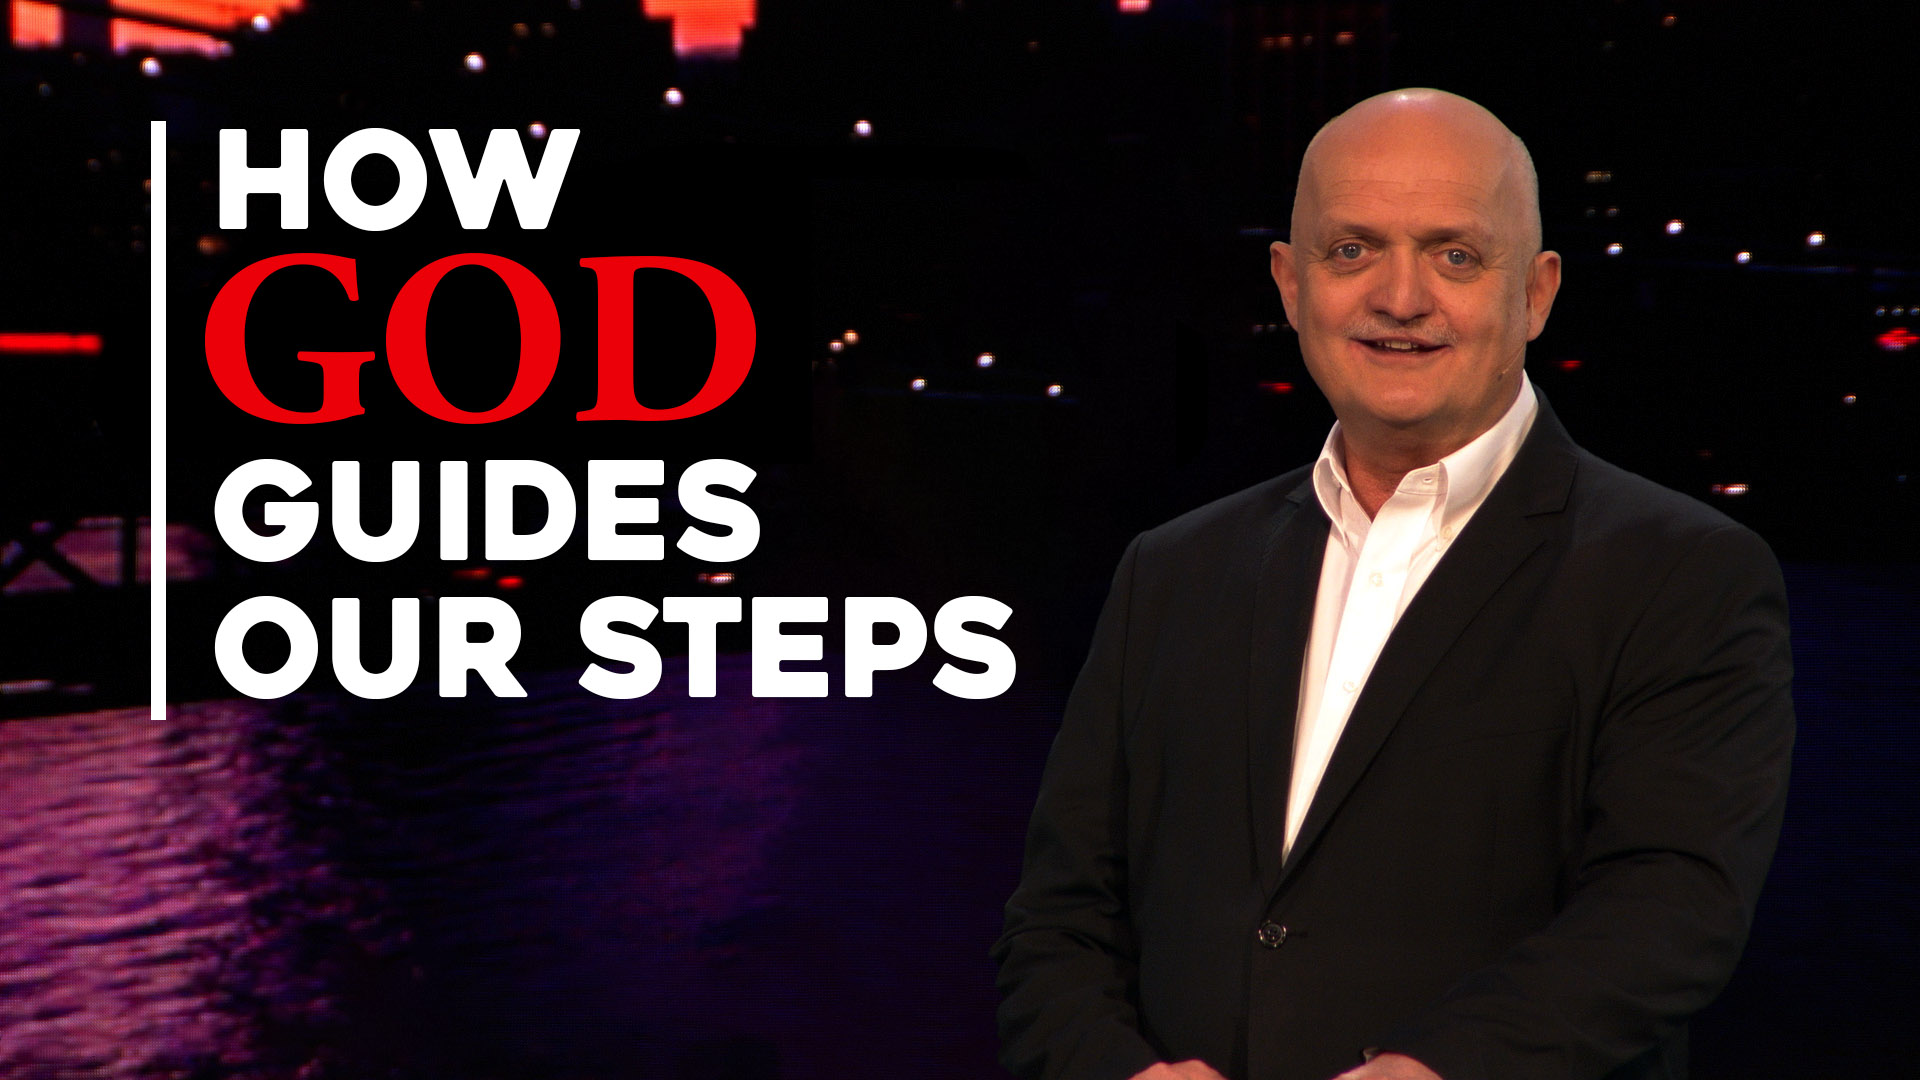 How God Guides Our Steps